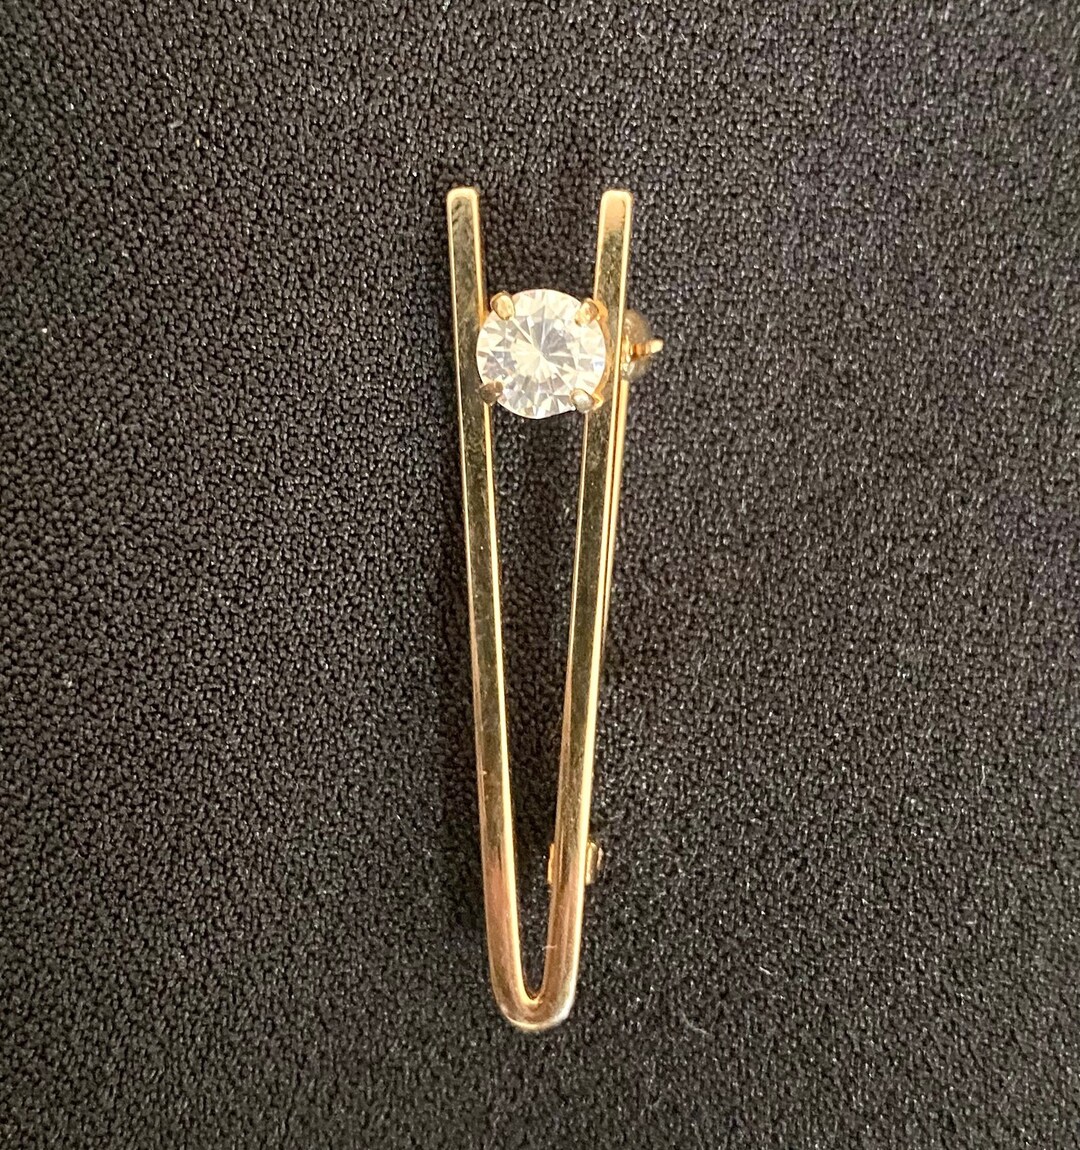 Vintage Yellow Gold Tone V Shaped Bar Pin Brooch With Solitare - Etsy